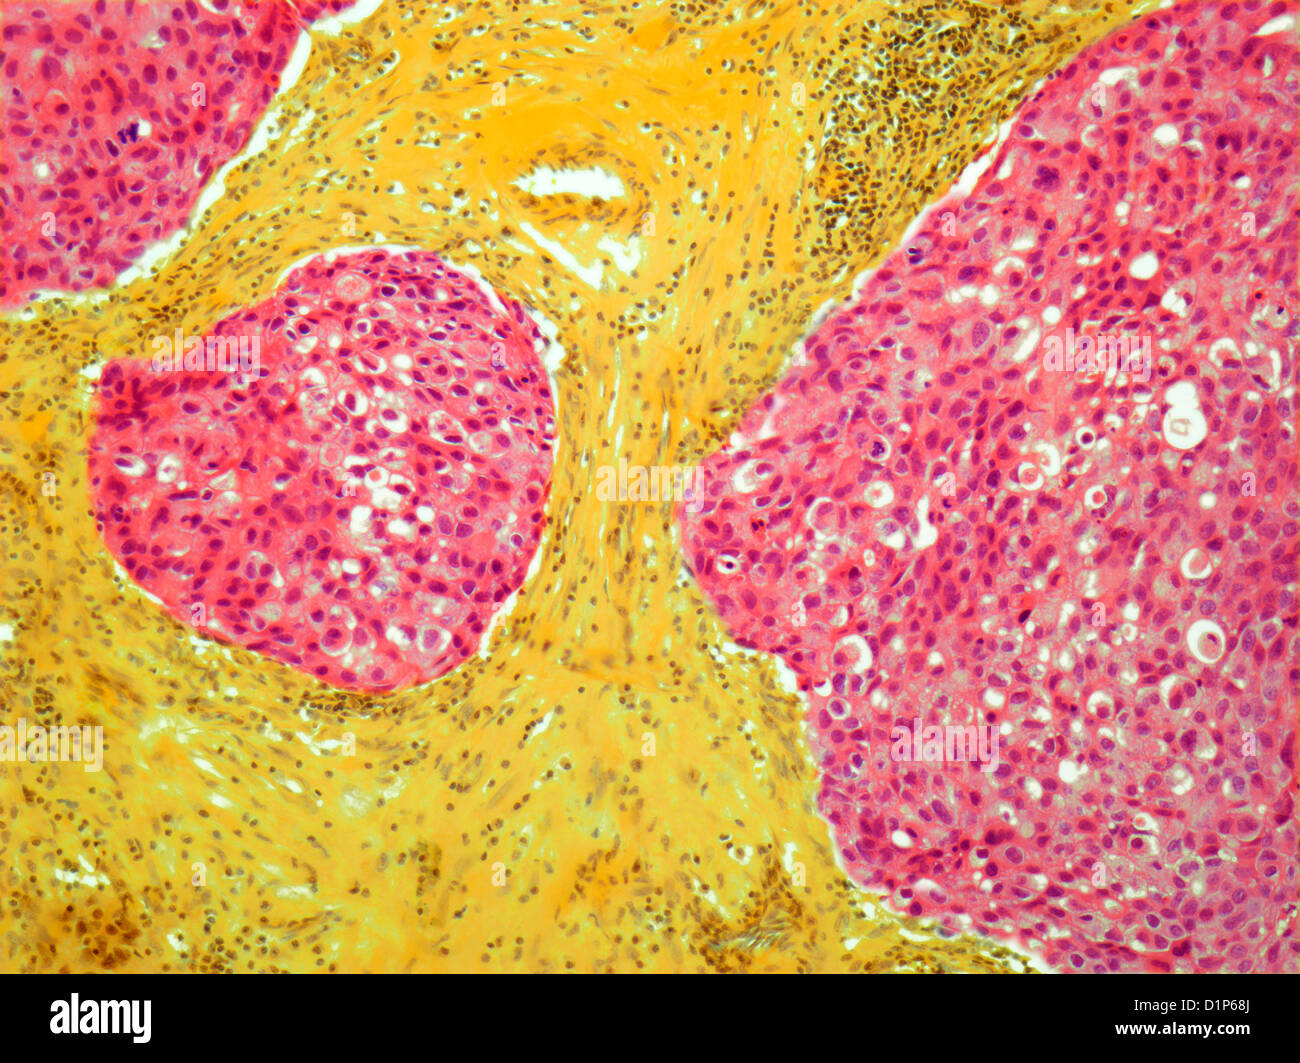 Breast cancer, light micrograph Stock Photo